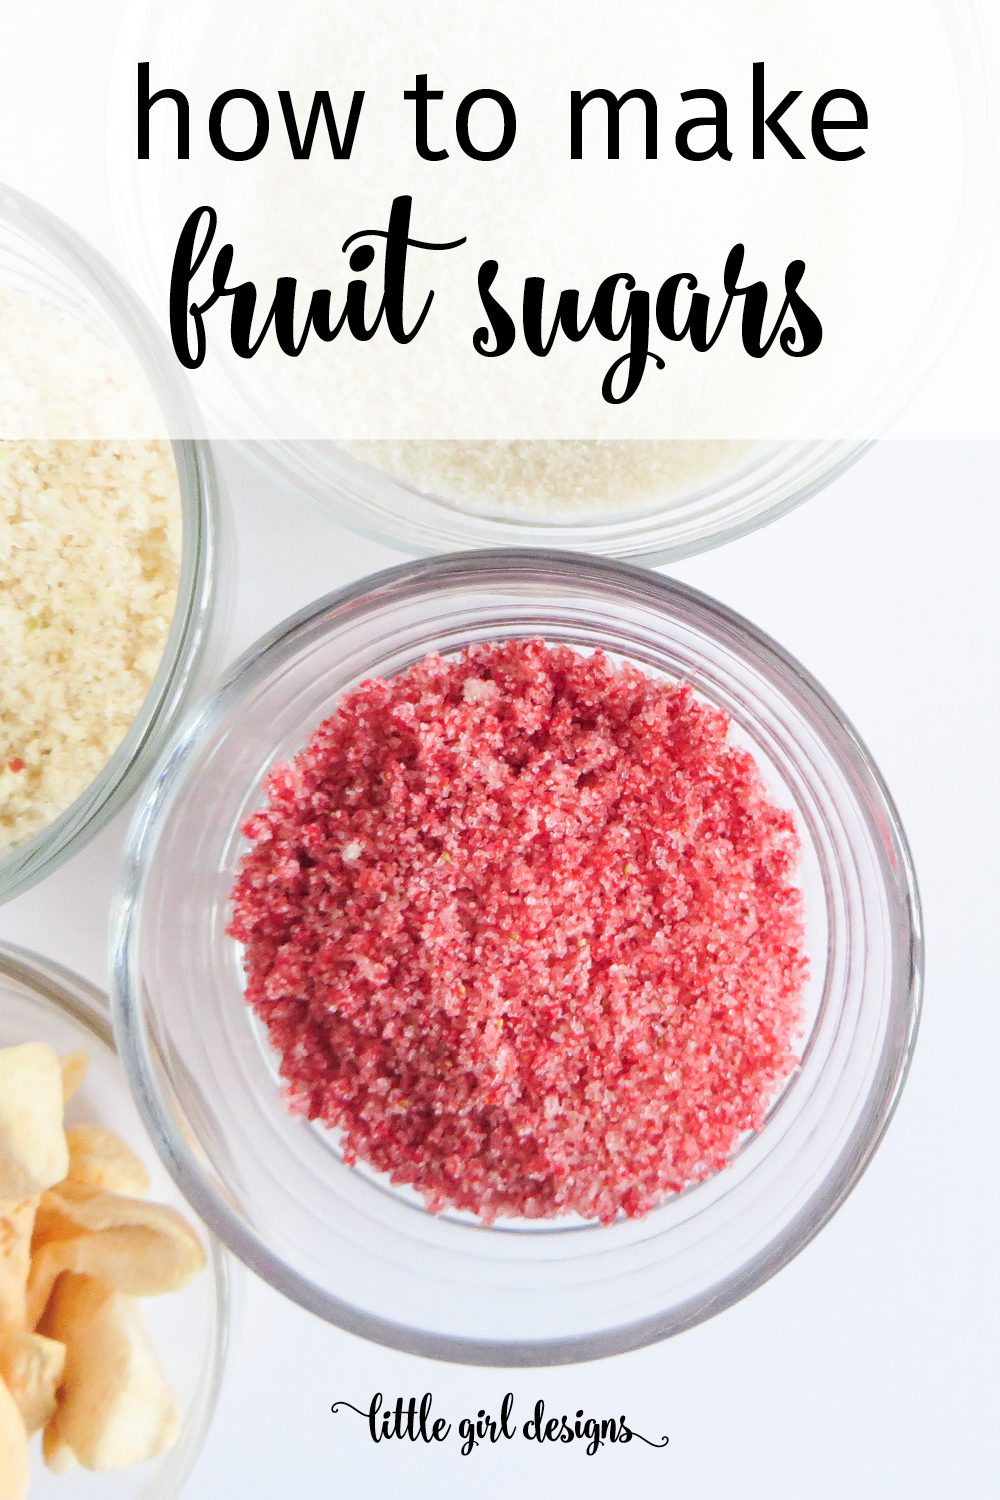 Have you ever made fruit sugar? It's a super simple recipe that you can whip up to give as gifts or to flavor your own cookies, toast, or tea!